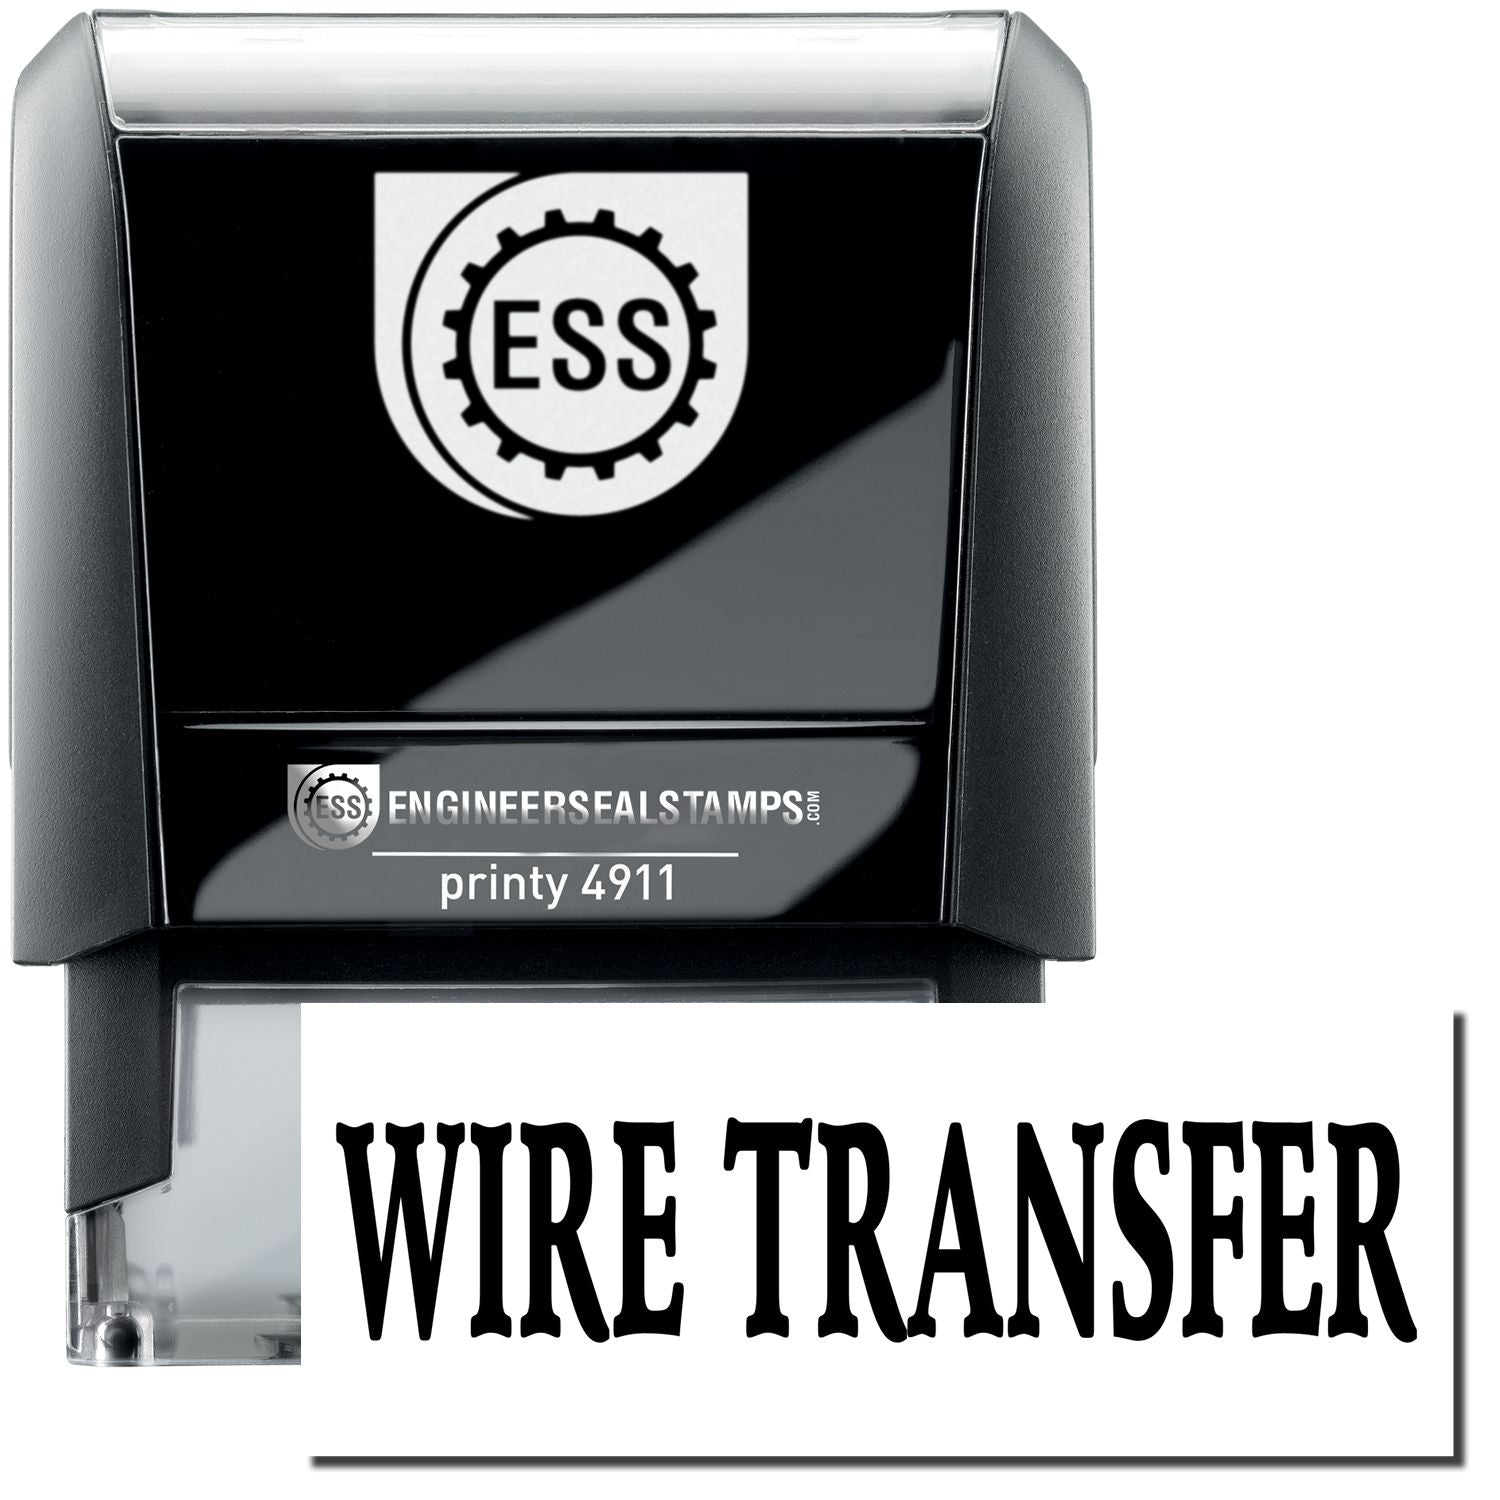 A self-inking stamp with a stamped image showing how the text "WIRE TRANSFER" is displayed after stamping.